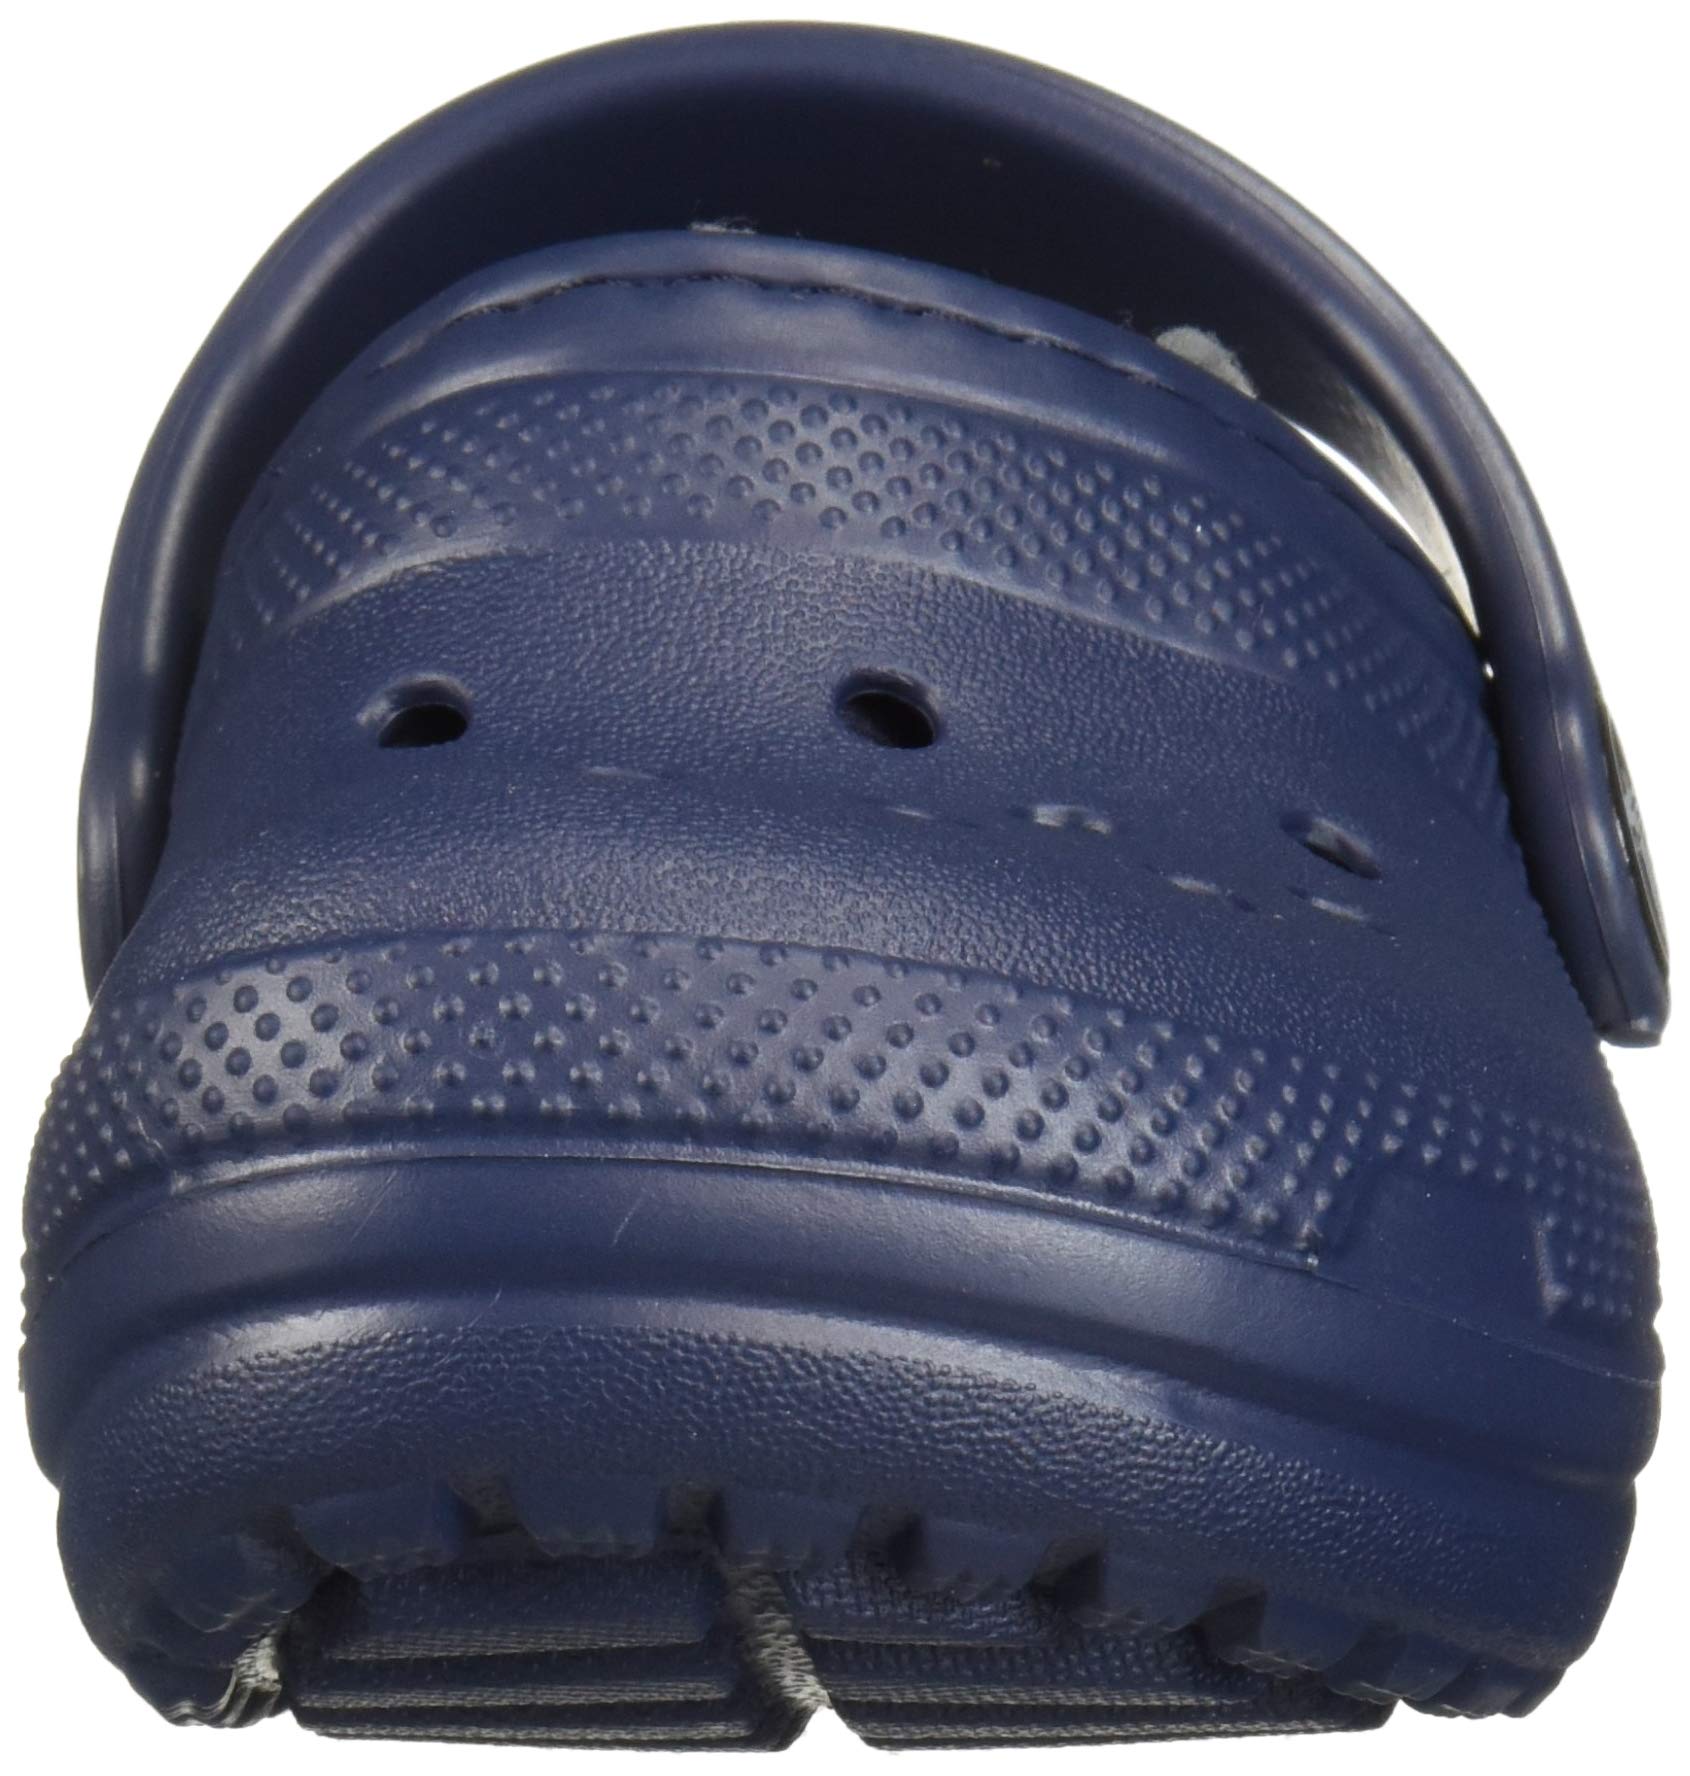 Crocs Toddler and Kids Classic Lined Clog